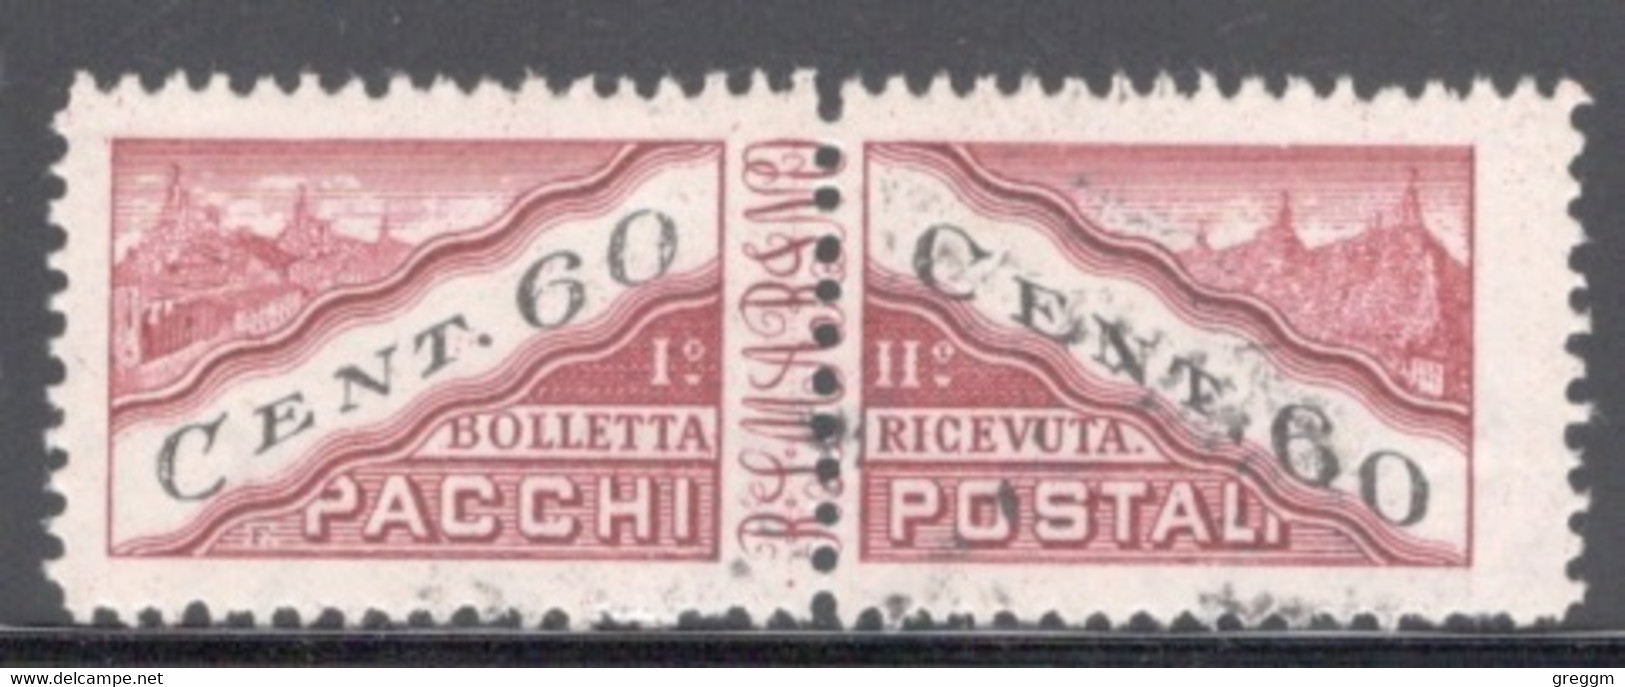 San Marino 1945 Single Stamp From The Set Of Parcel Post  In Fine Used - Usati